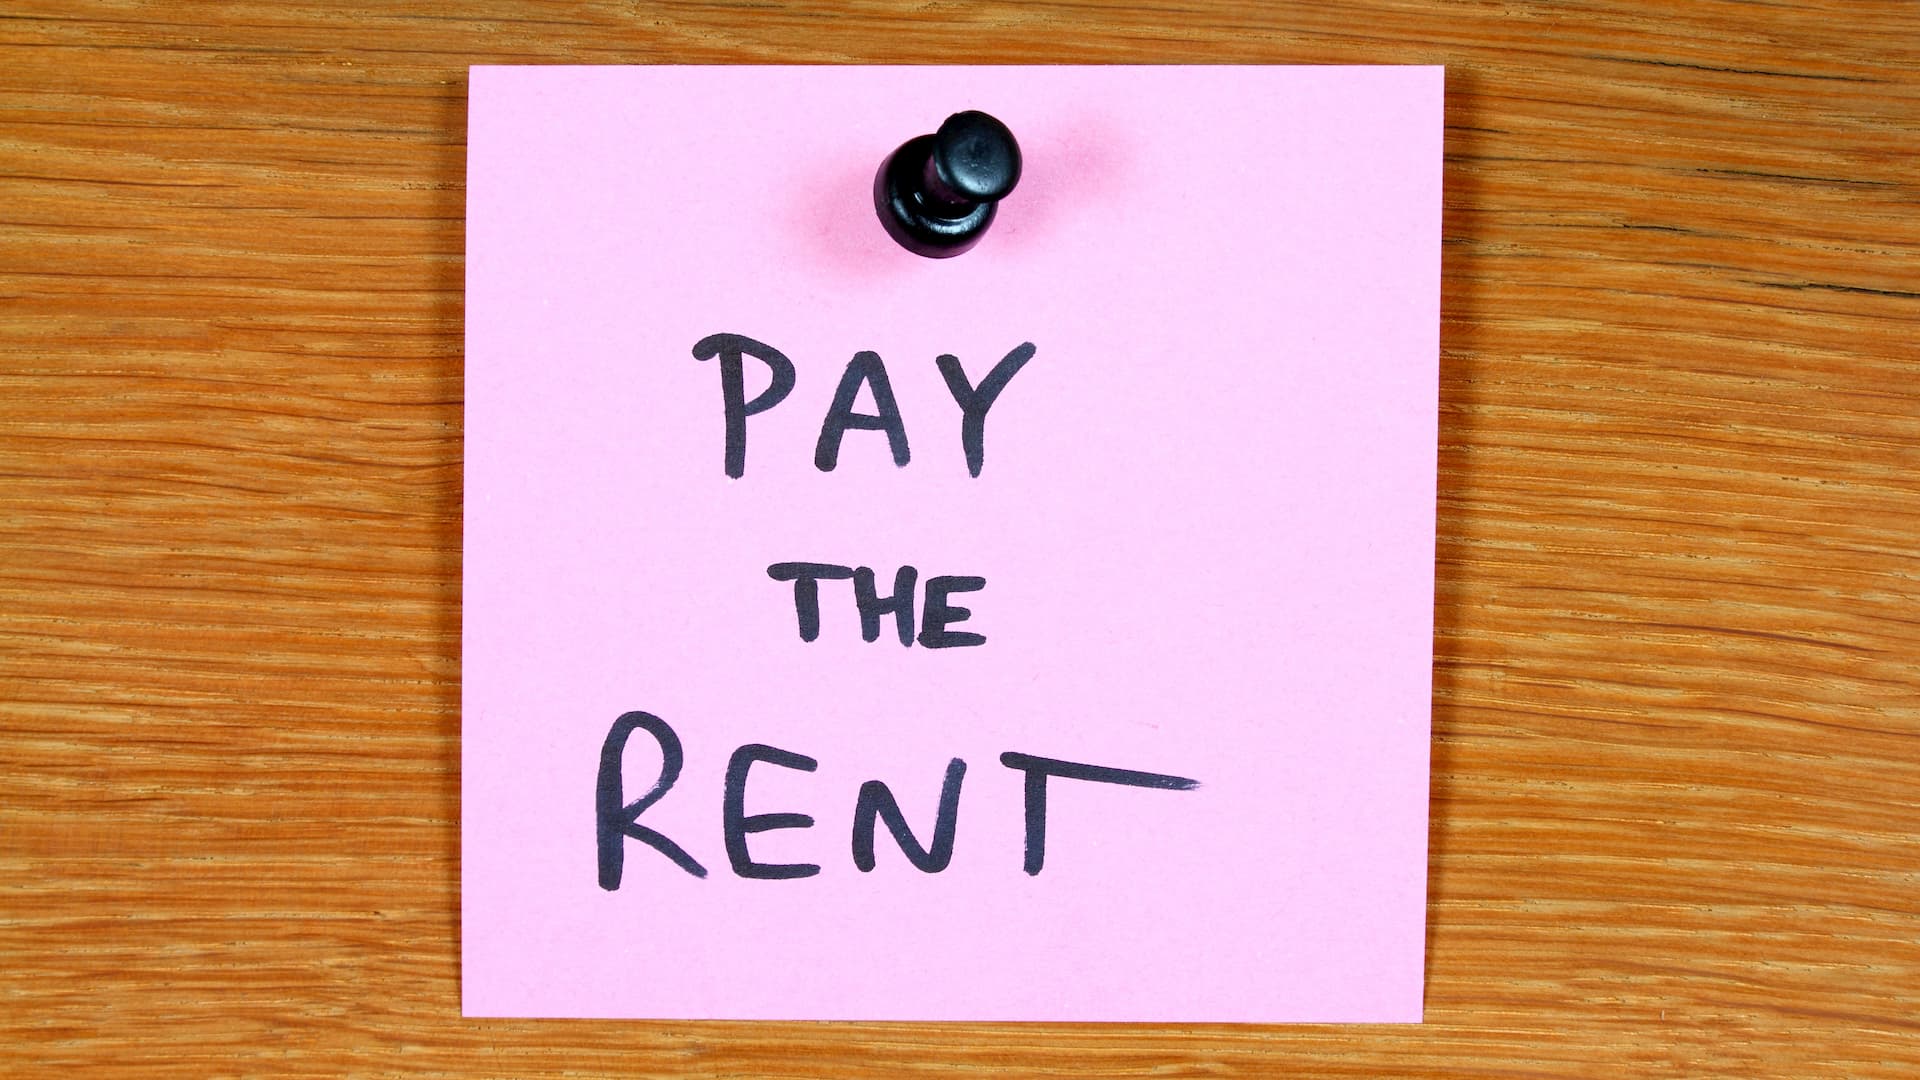 Pay the rent